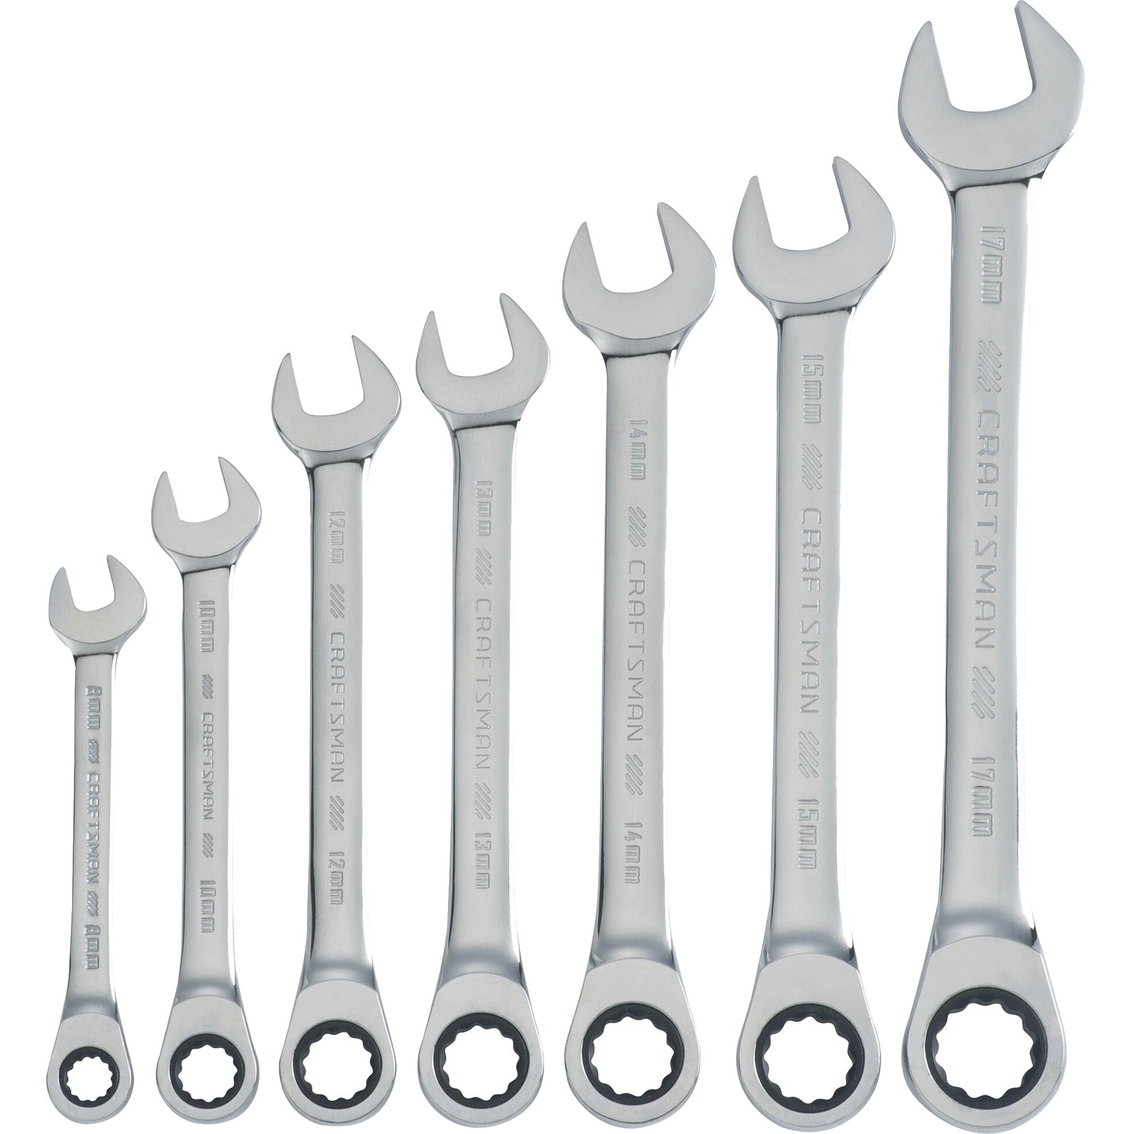 Craftsman 7 pc. Metric Ratcheting Combination Wrench Set - Image 2 of 4